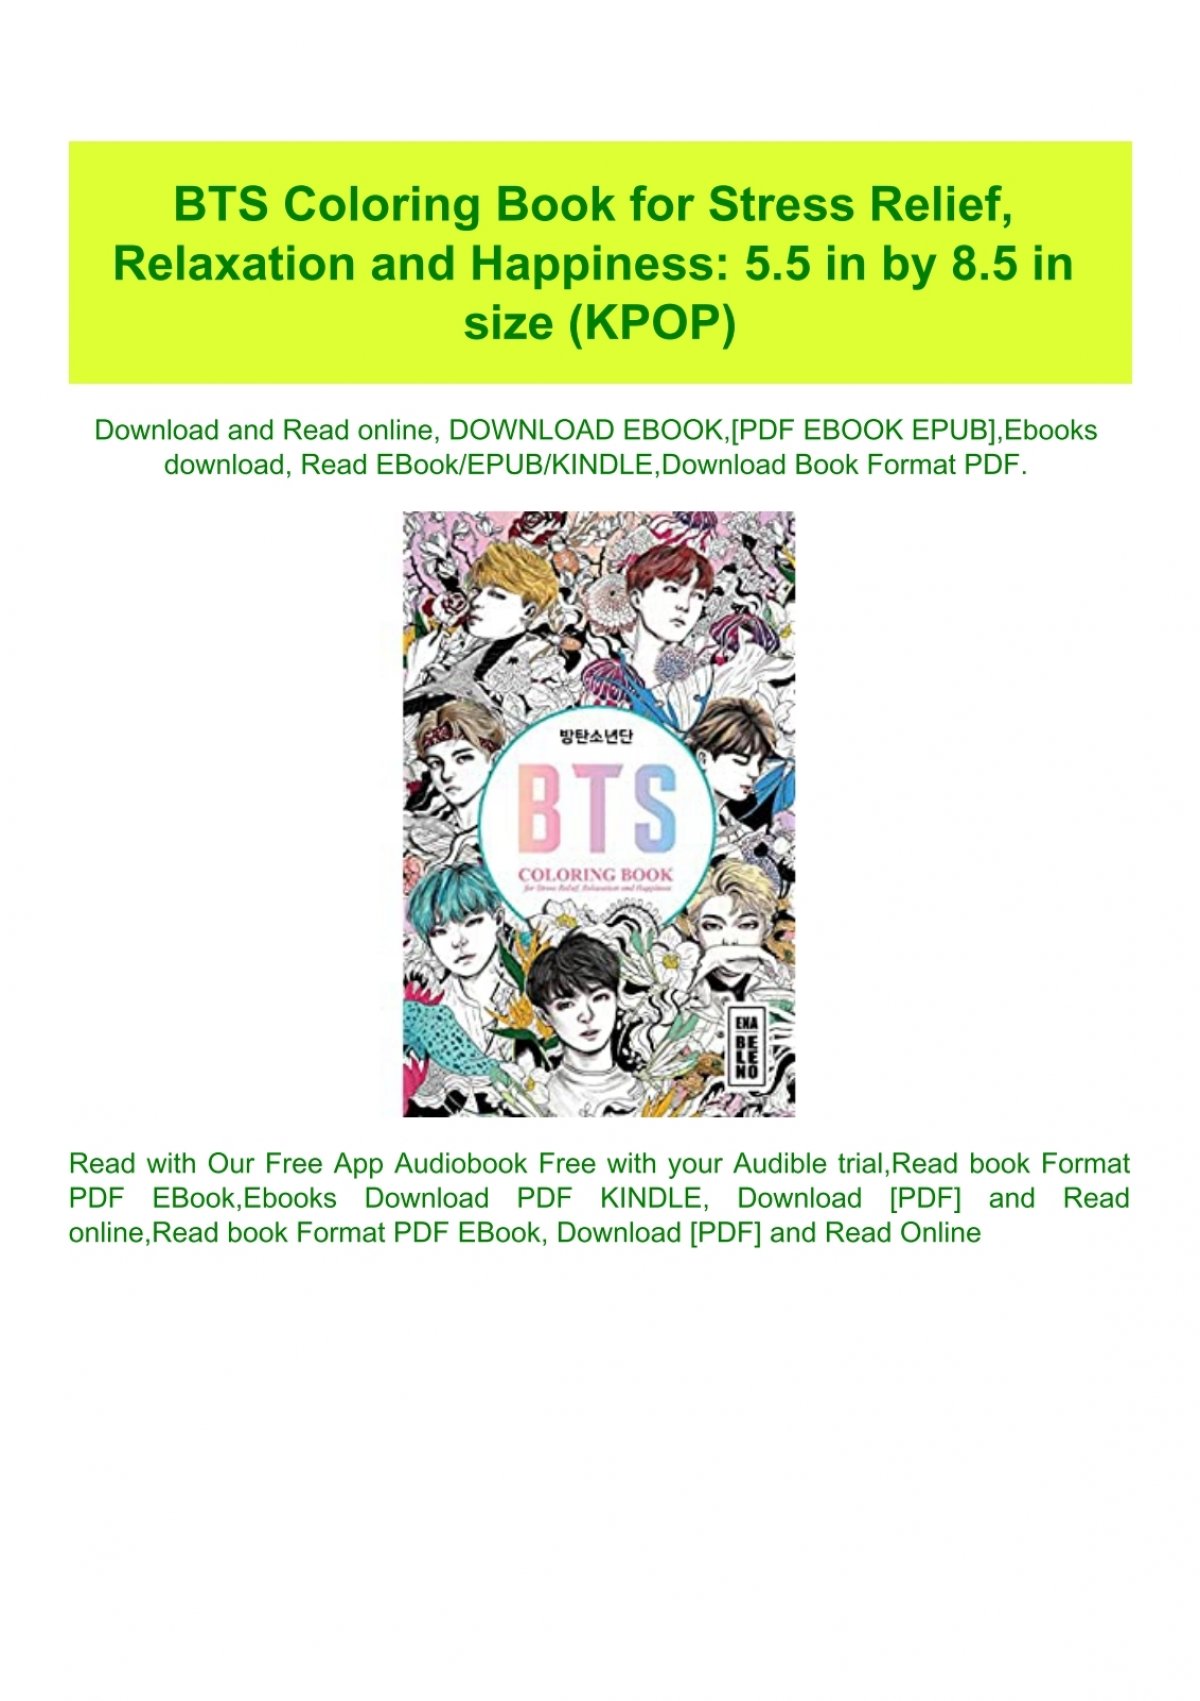 Download Read Pdf Bts Coloring Book For Stress Relief Relaxation And Happiness 5 5 In By 8 5 In Size Kpop Pdf